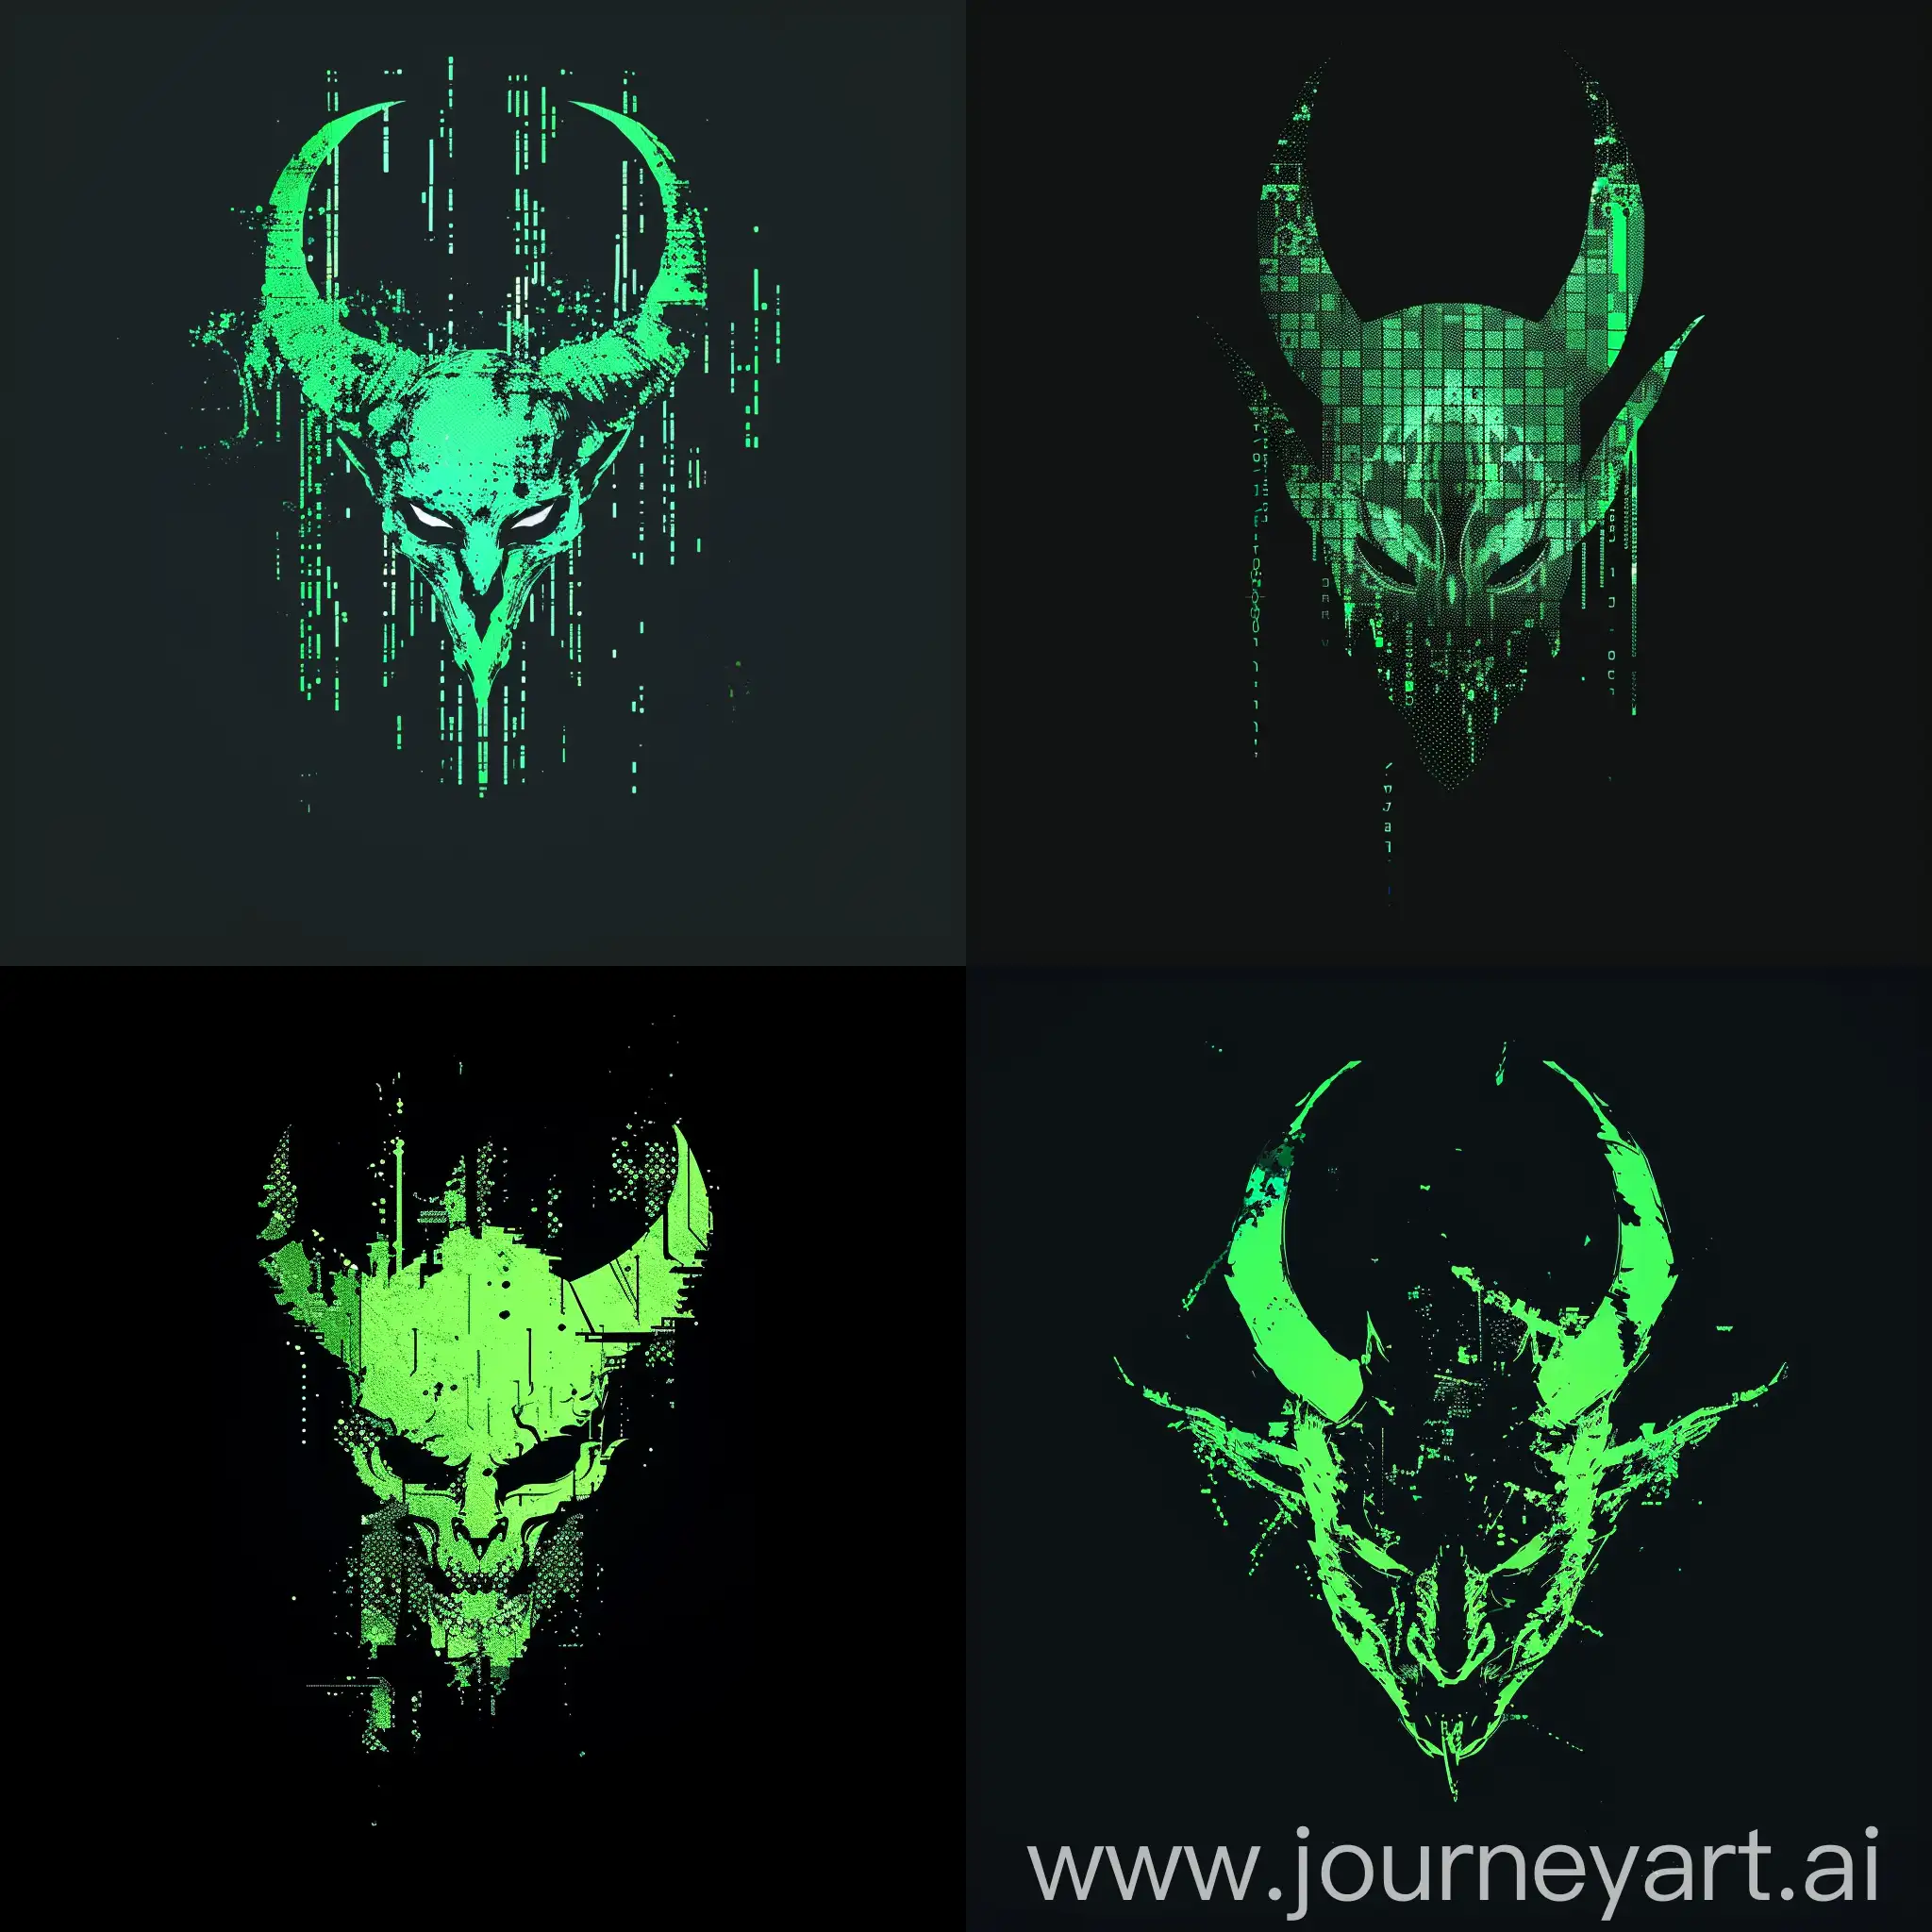 User A a minimalistic devil head silhouette, with a centralized position, in vibrant green colors. The design incorporates elements of digital devilry and cyberpunk aesthetics, with glitch effects adding a futuristic and edgy feel. The devil head is the focal point of the image, standing out against a clear black background that enhances its visual impact. The overall style is minimalistic, but catchy. Despite glitches, the silhouette must have a clear outline.